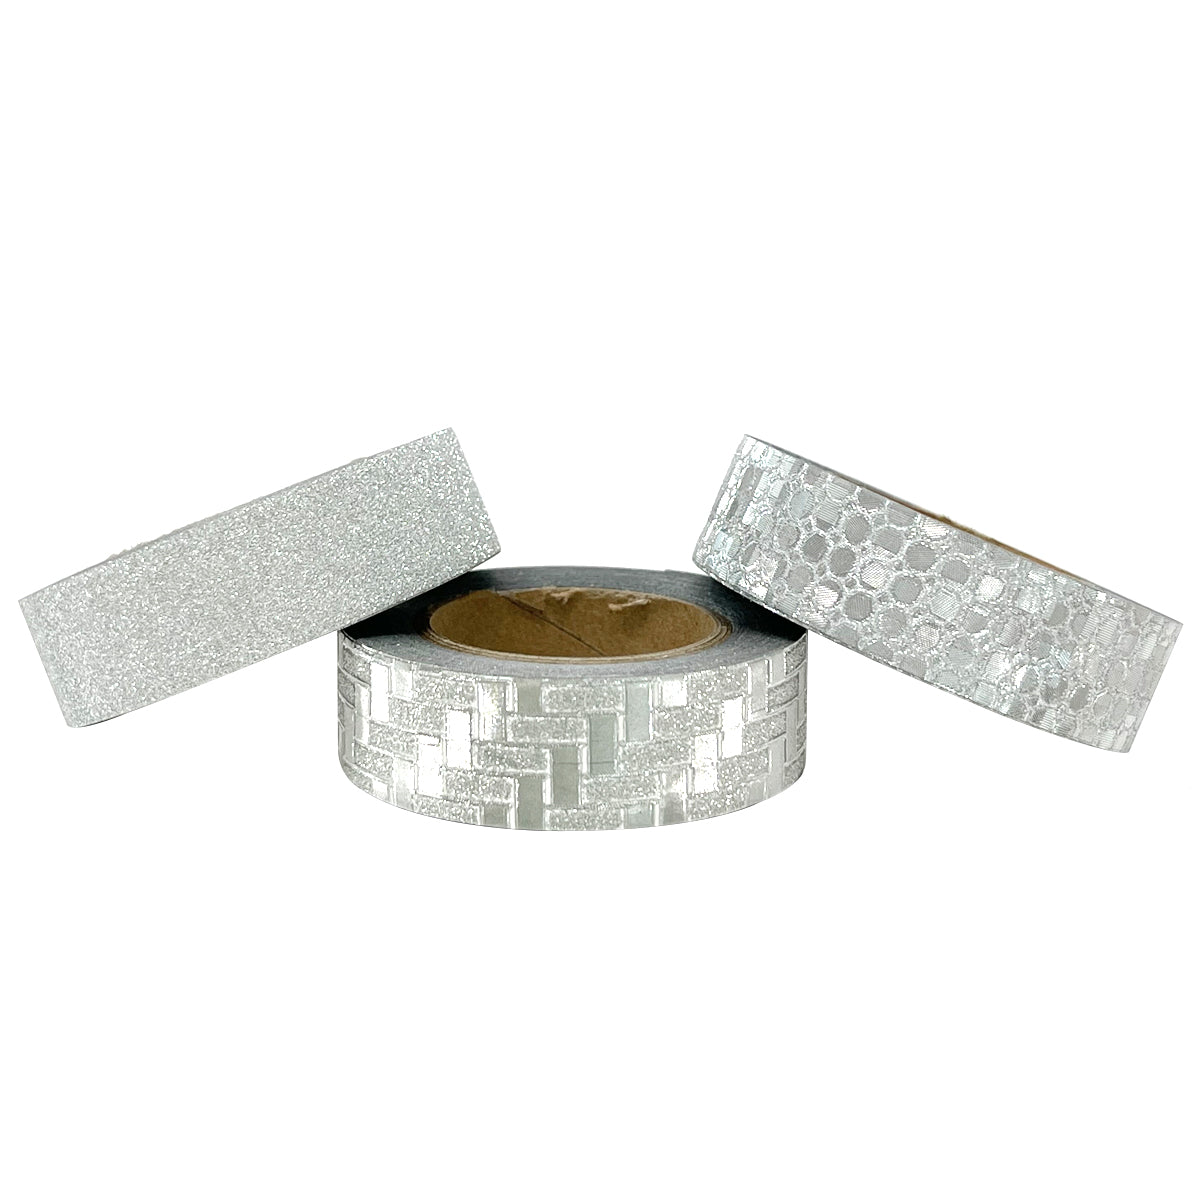 Wrapables Glitter and Shine Washi Tapes Decorative Masking Tapes (Set of 3) Solid Glitter Pastel